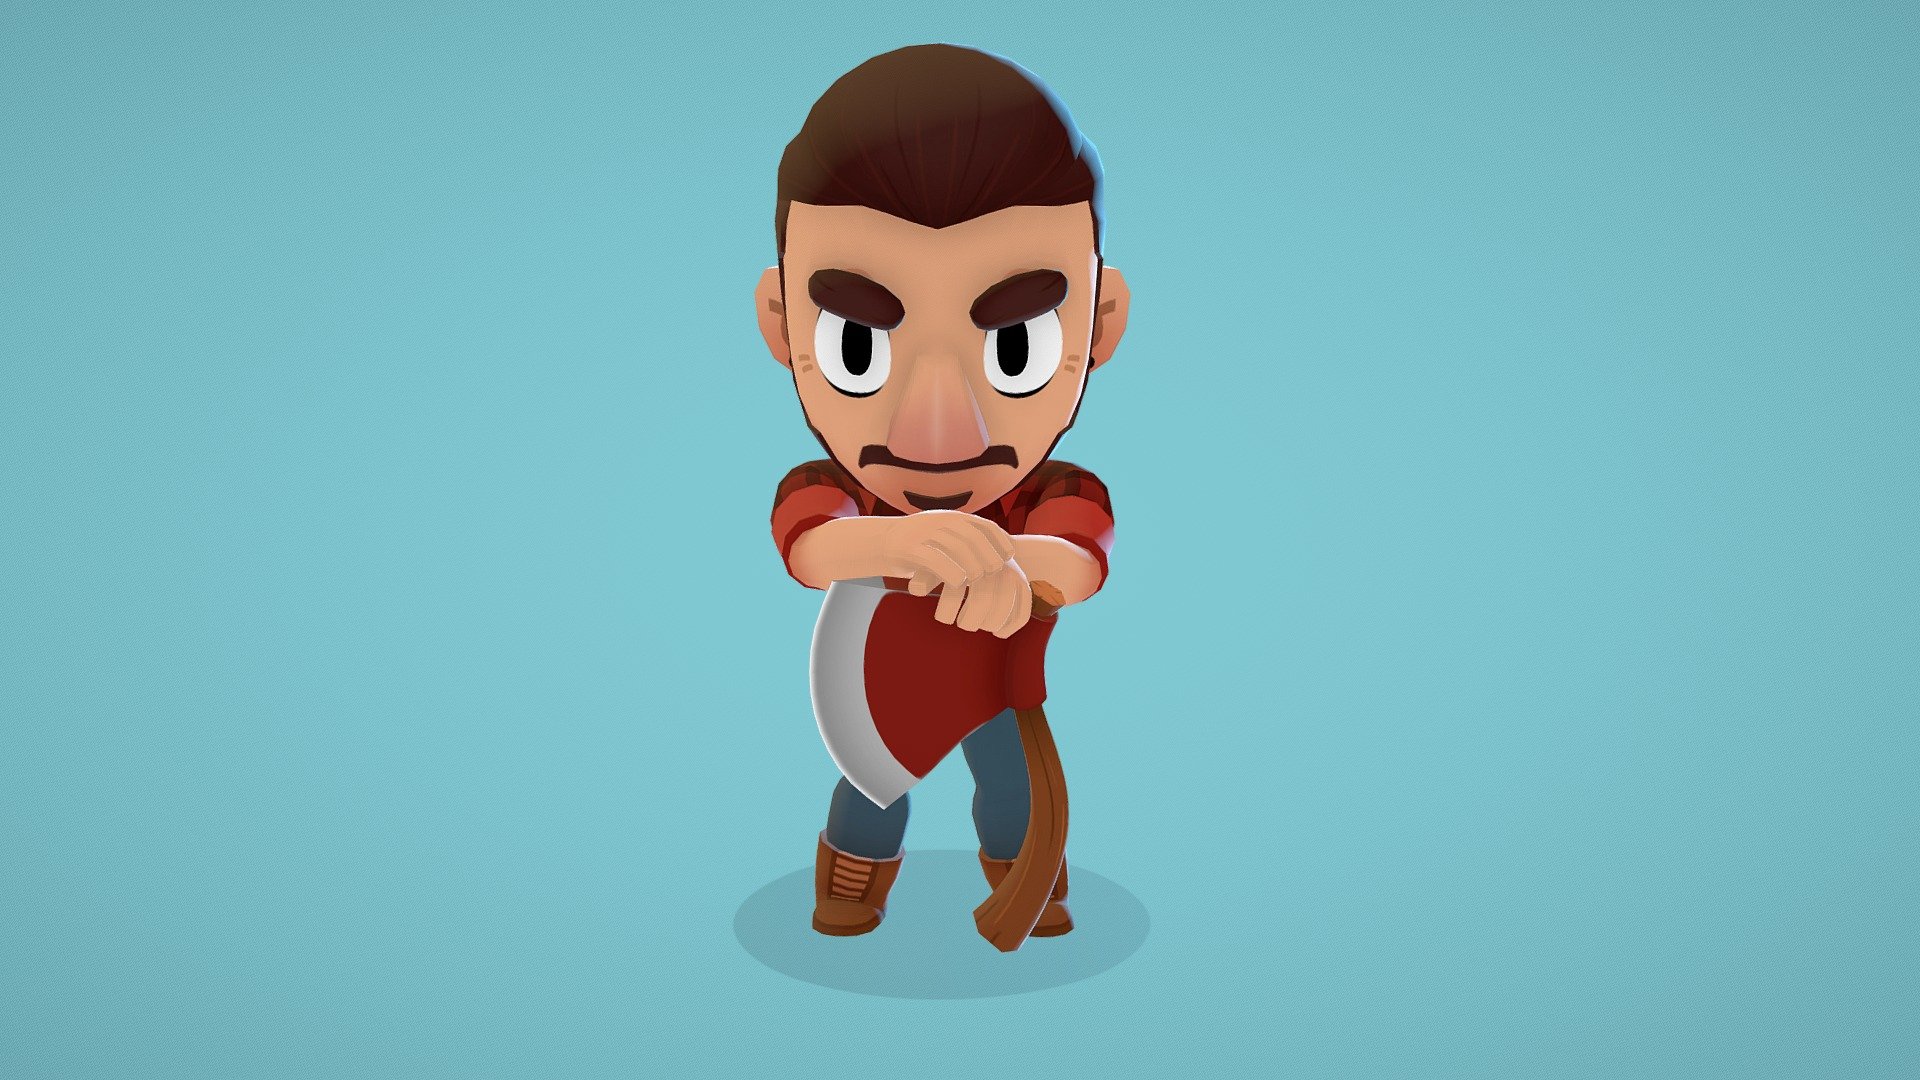 Lumberjack stylized. I made it as a challenge as fast as I could (character design, modeling, texturing and rigging) I needed 12 h to complete the whole process. I enjoyed it a lot. Hope you like it! - Lumberjack - 3D model by Jonás (@jonasaguilar) 3d model